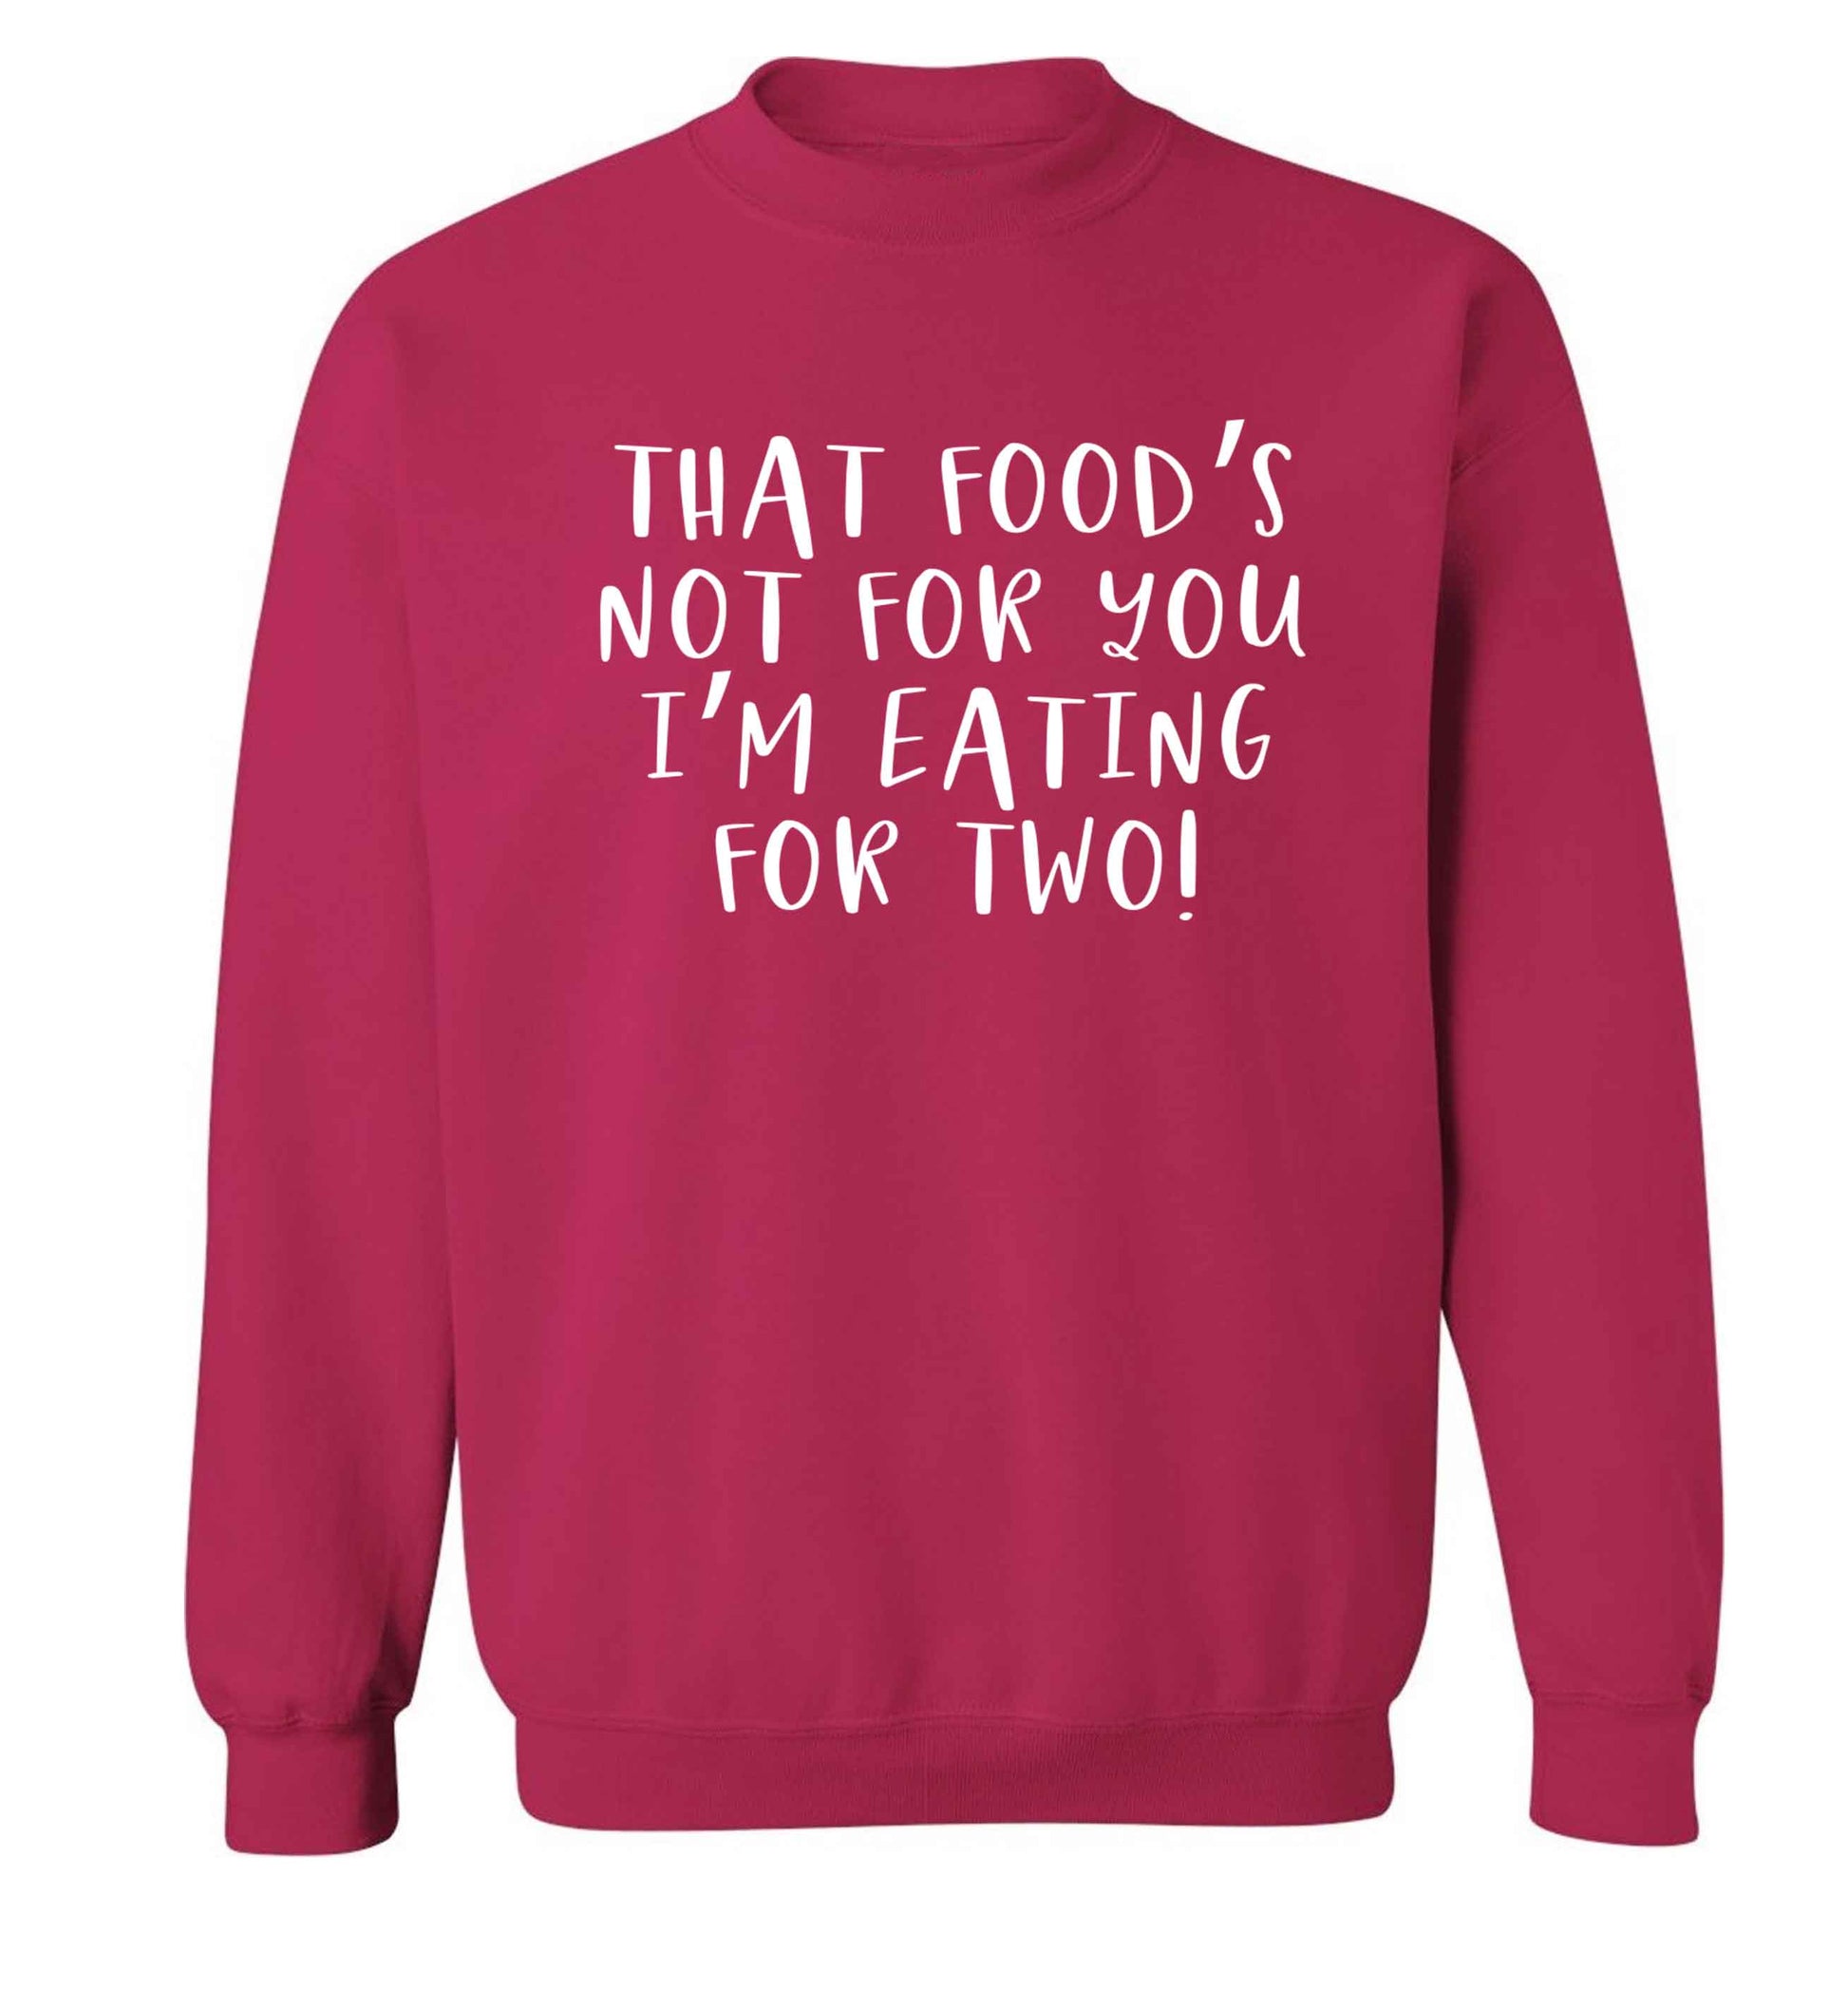 That food's not for you I'm eating for two Adult's unisex pink Sweater 2XL